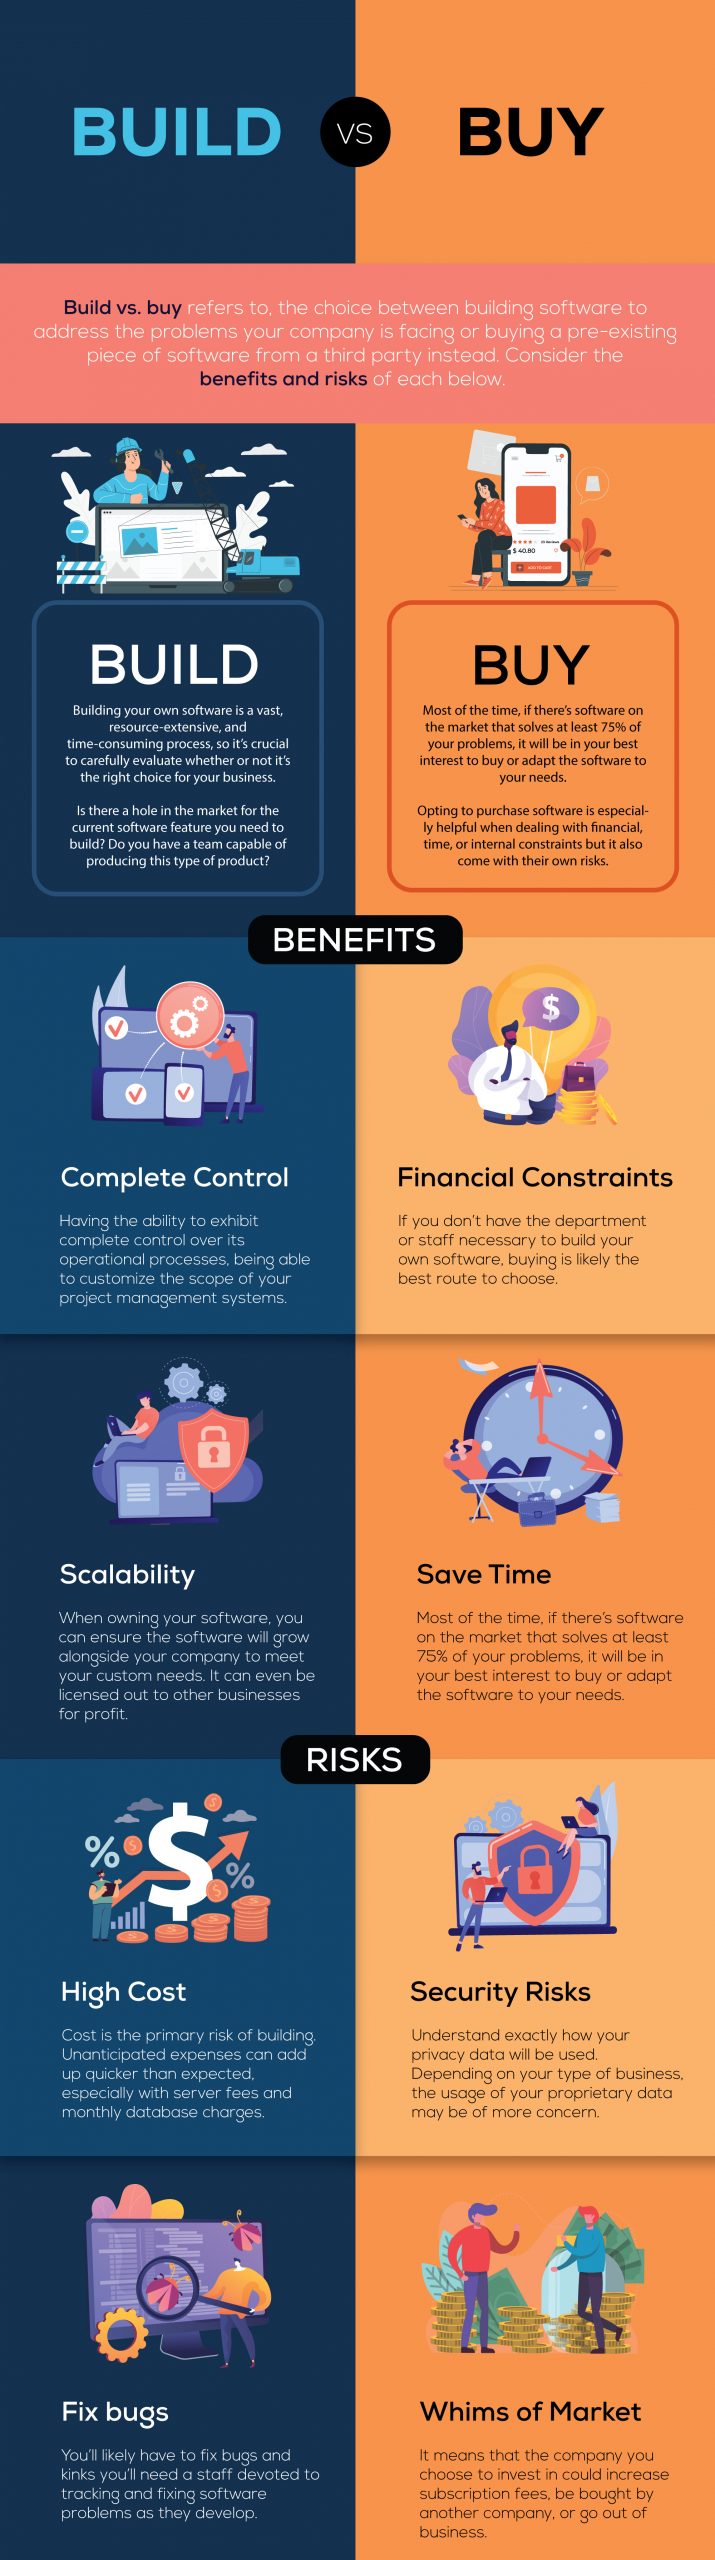 infographic comparing reasons to build vs. buy software